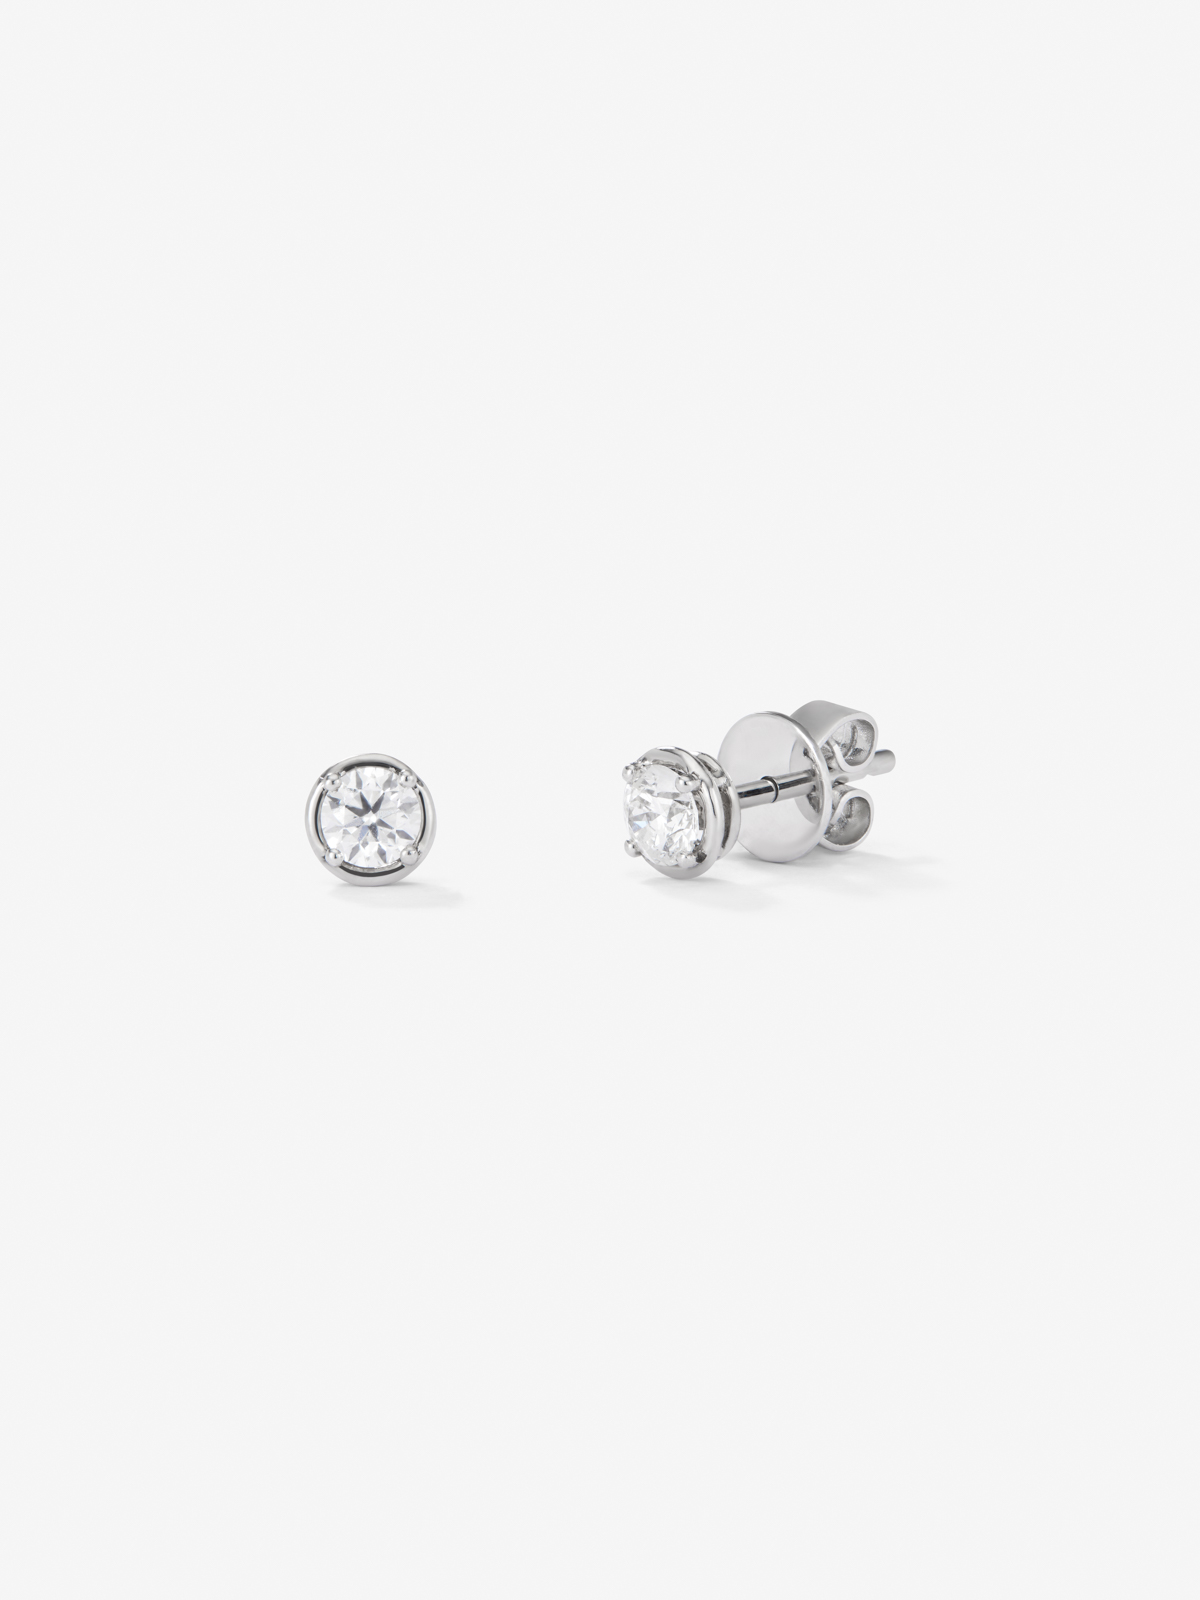 18K White Gold Earrings with Solitaire Diamond